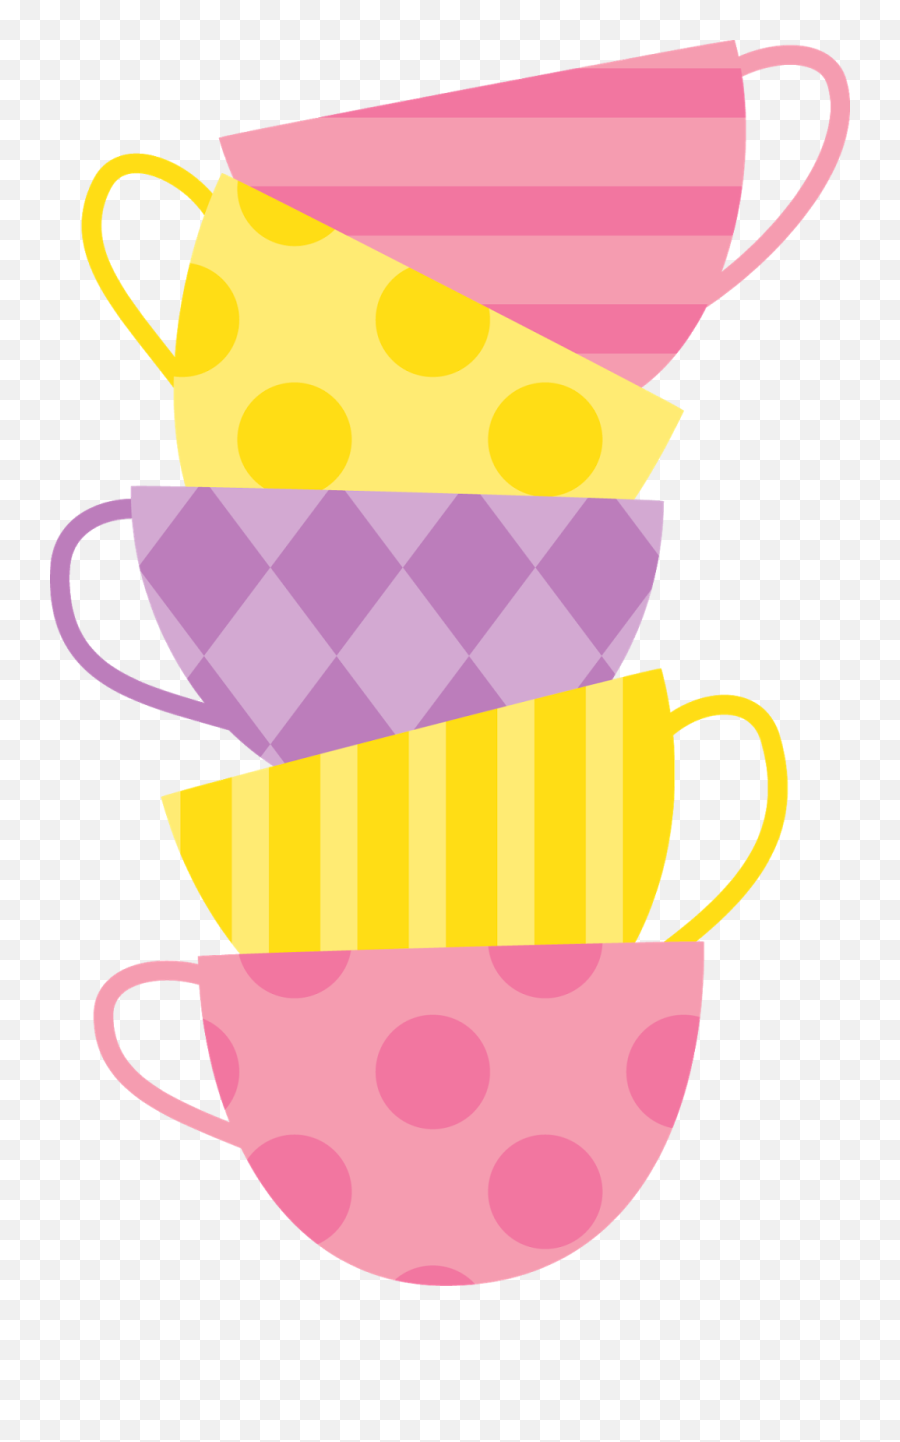 Cup Clipart Alice In Wonderland Cup - Alice In Wonderland Tea Cups Clipart Emoji,Alice In Wonderland Clipart